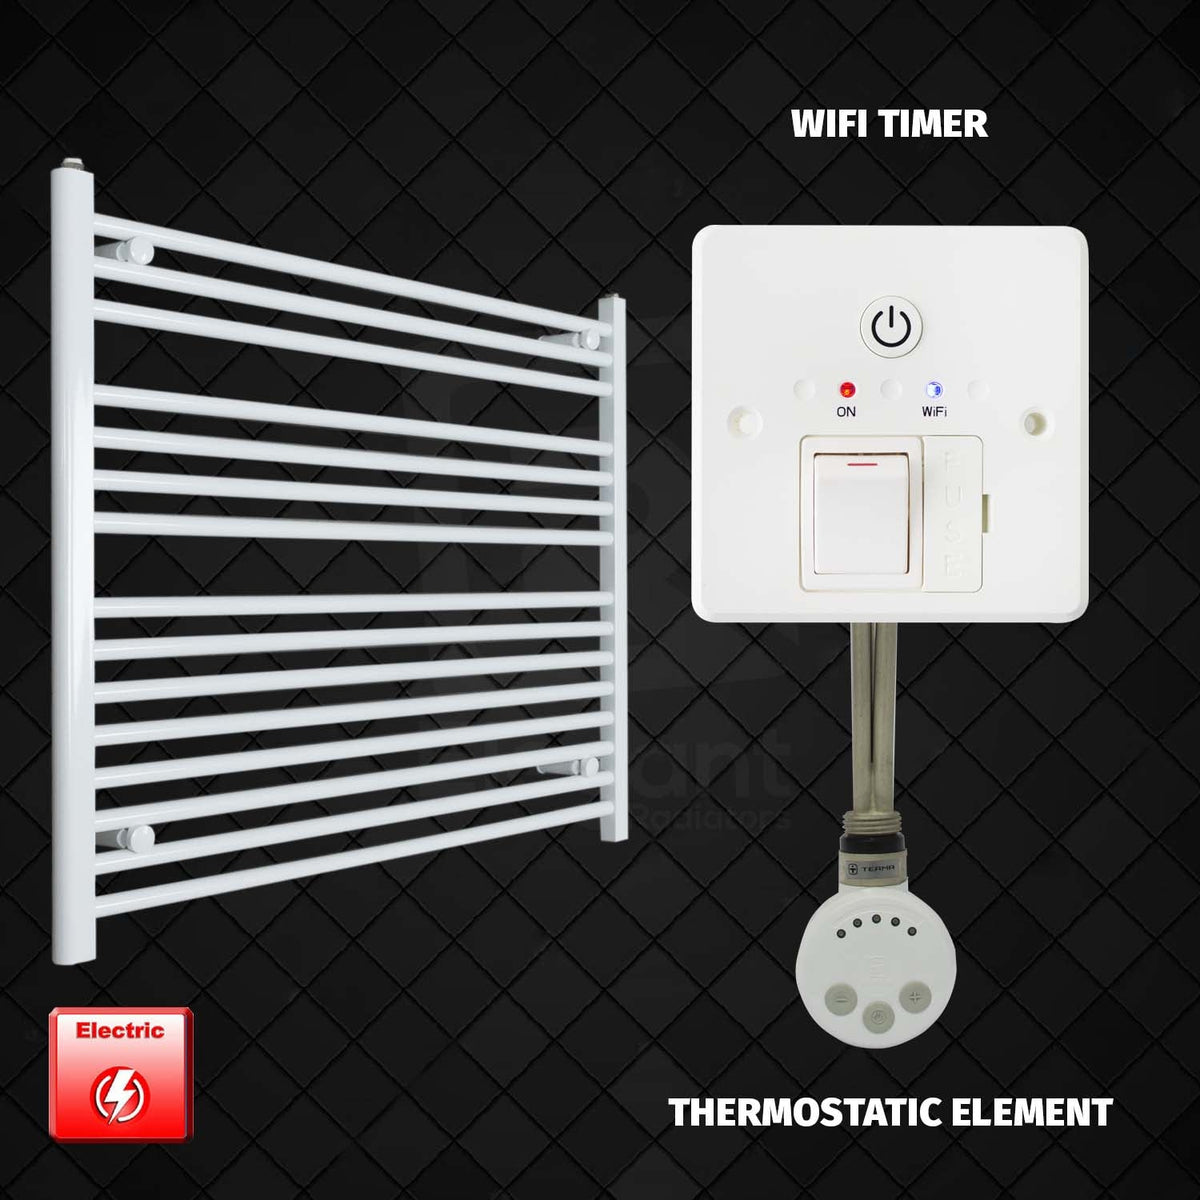 800 x 1200 Pre-Filled Electric Heated Towel Radiator White HTR MOA Thermostatic element Wifi timer